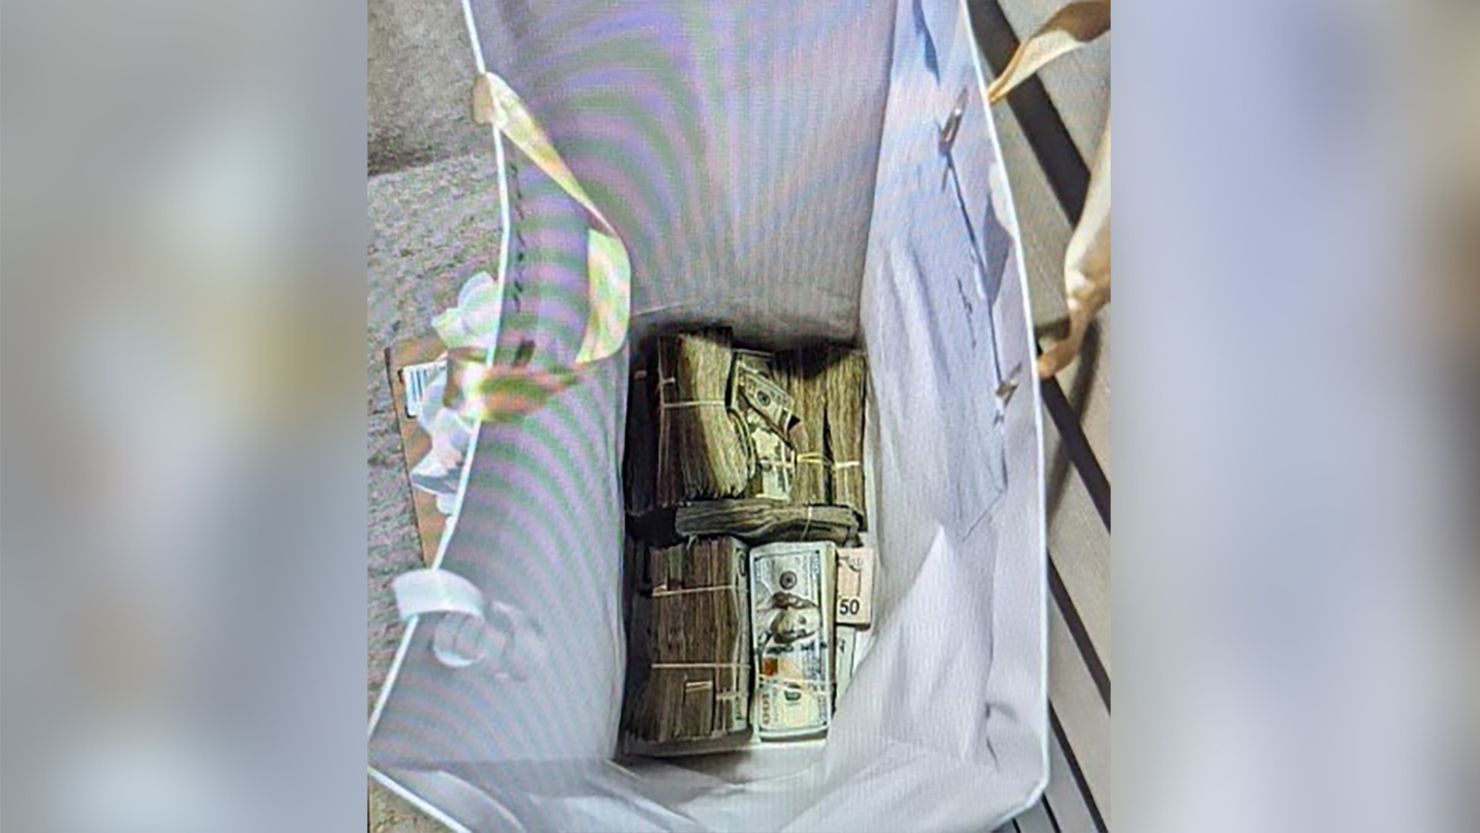 Prosecutors allege that a gift bag full of money was left at a juror's home.